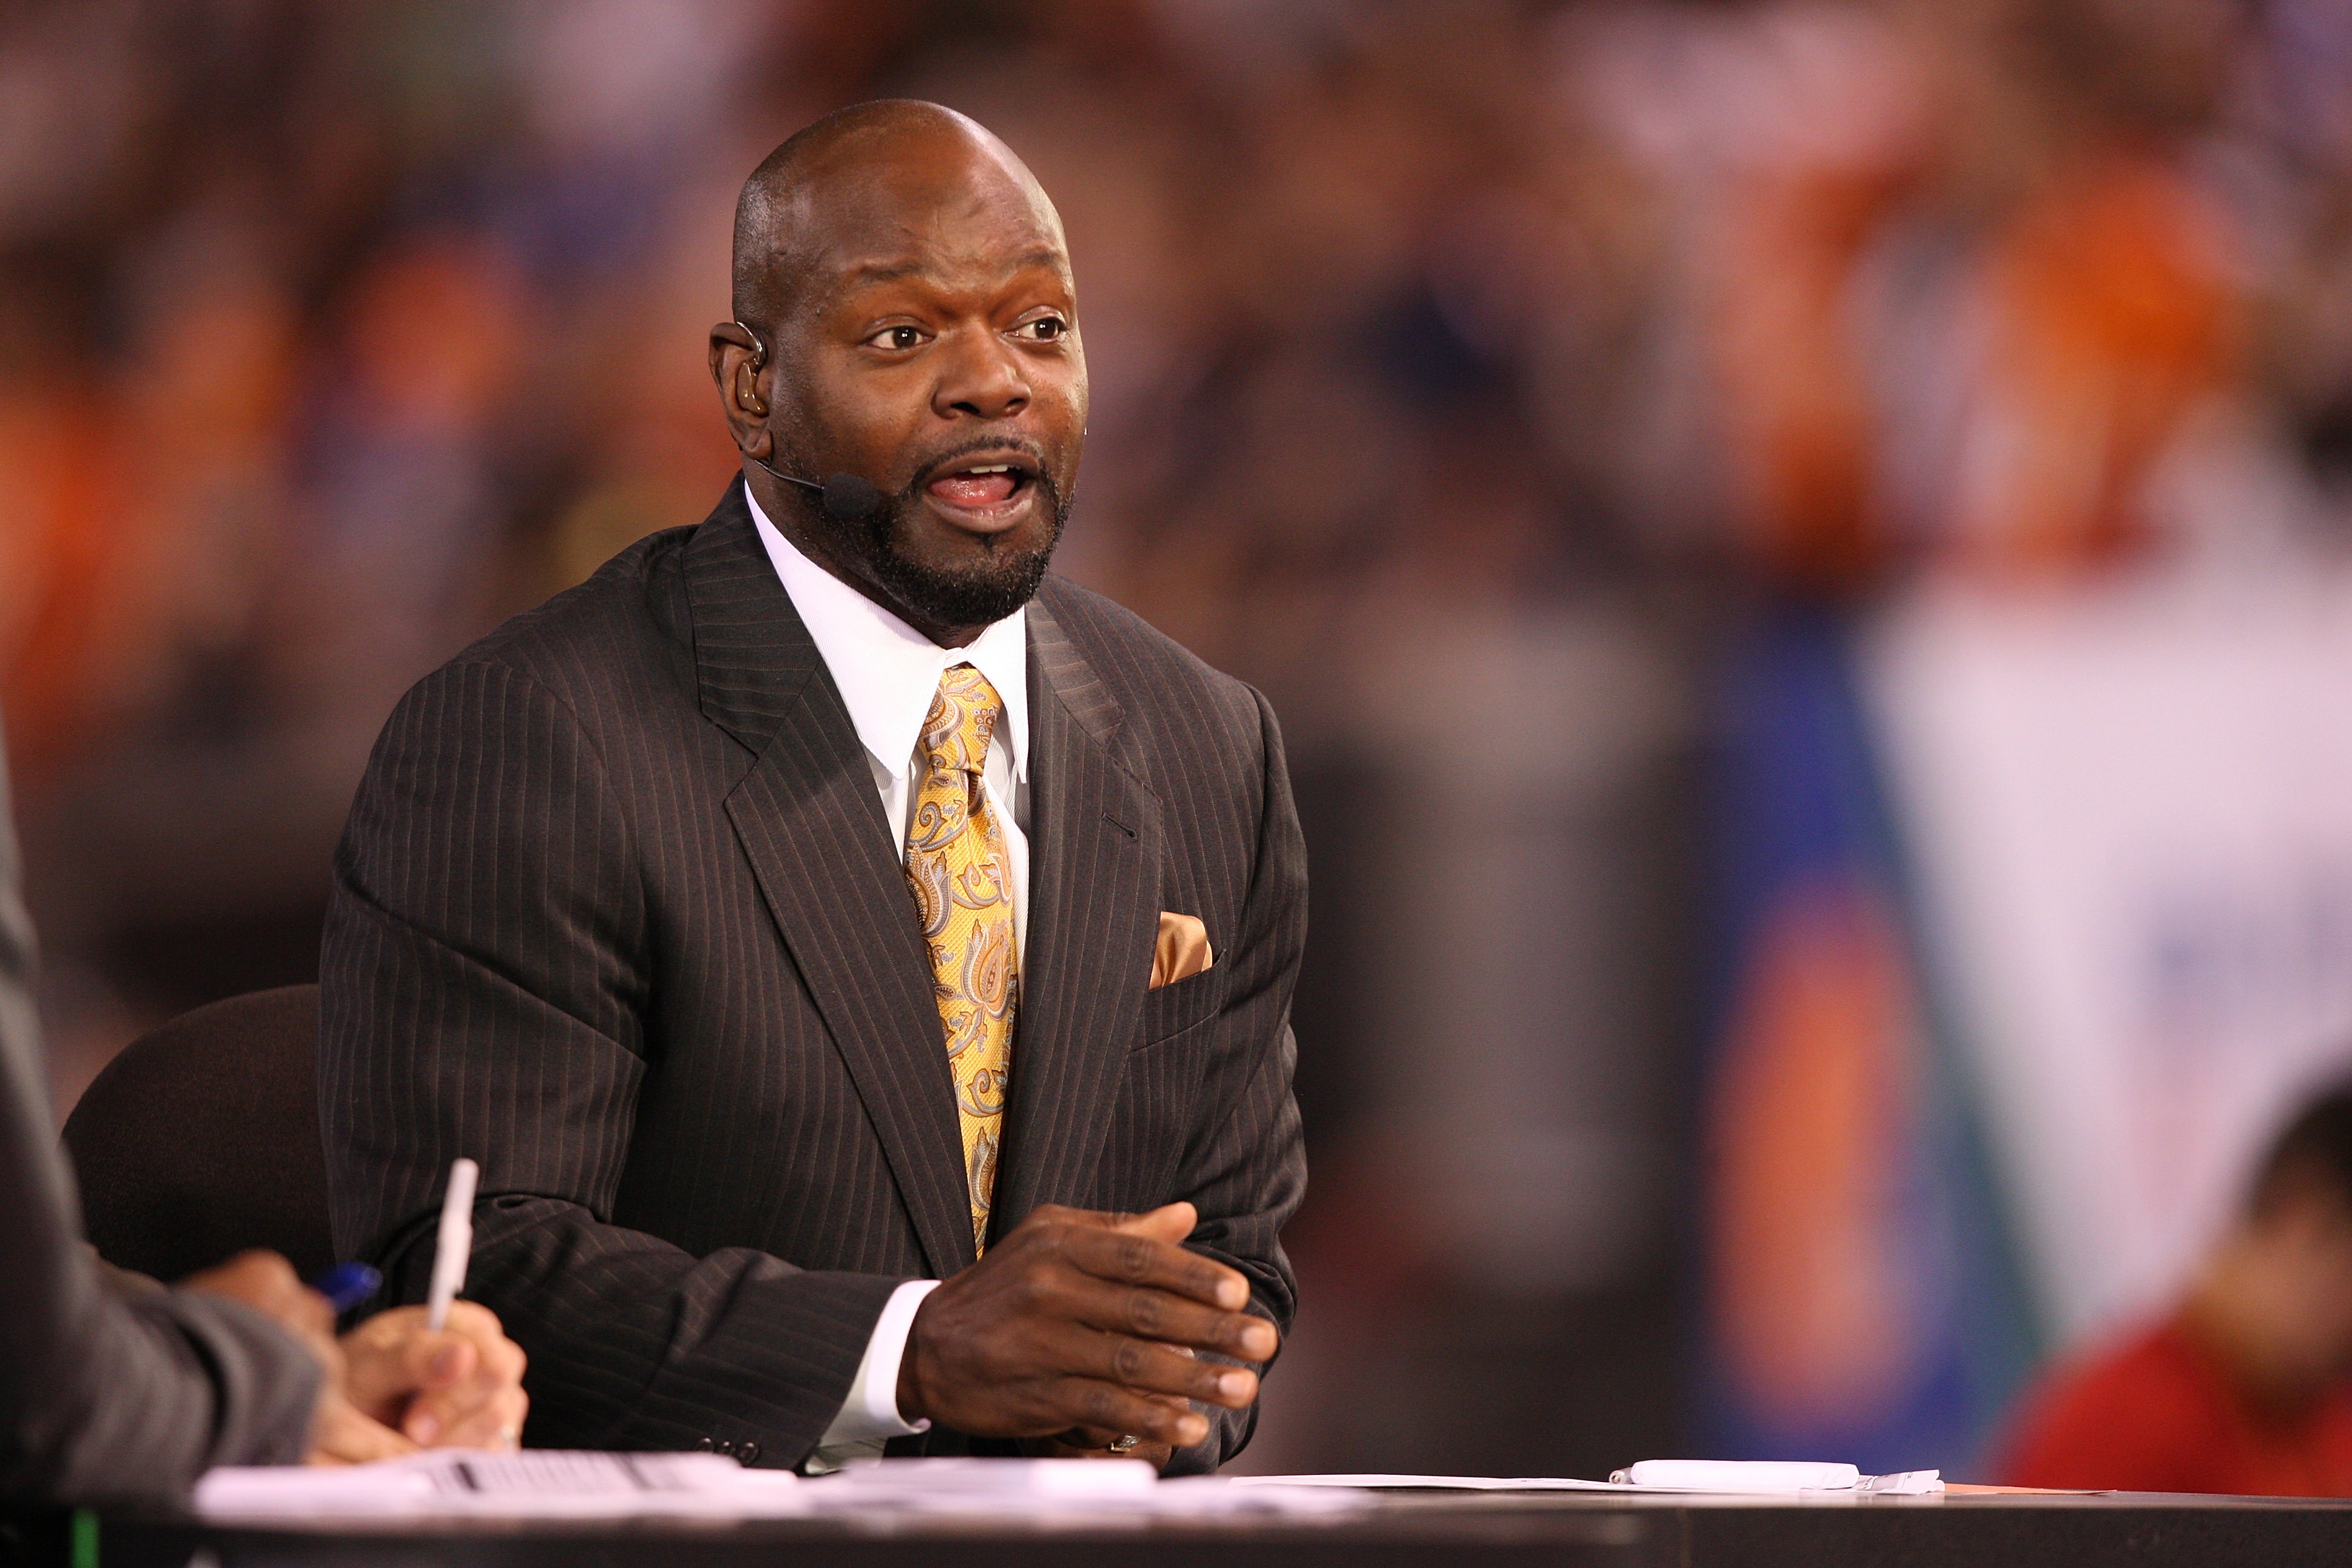 Former Dallas Cowboys star Emmitt Smith is among the greatest running backs in NFL history. Smith never came close to having the same success at ESPN.